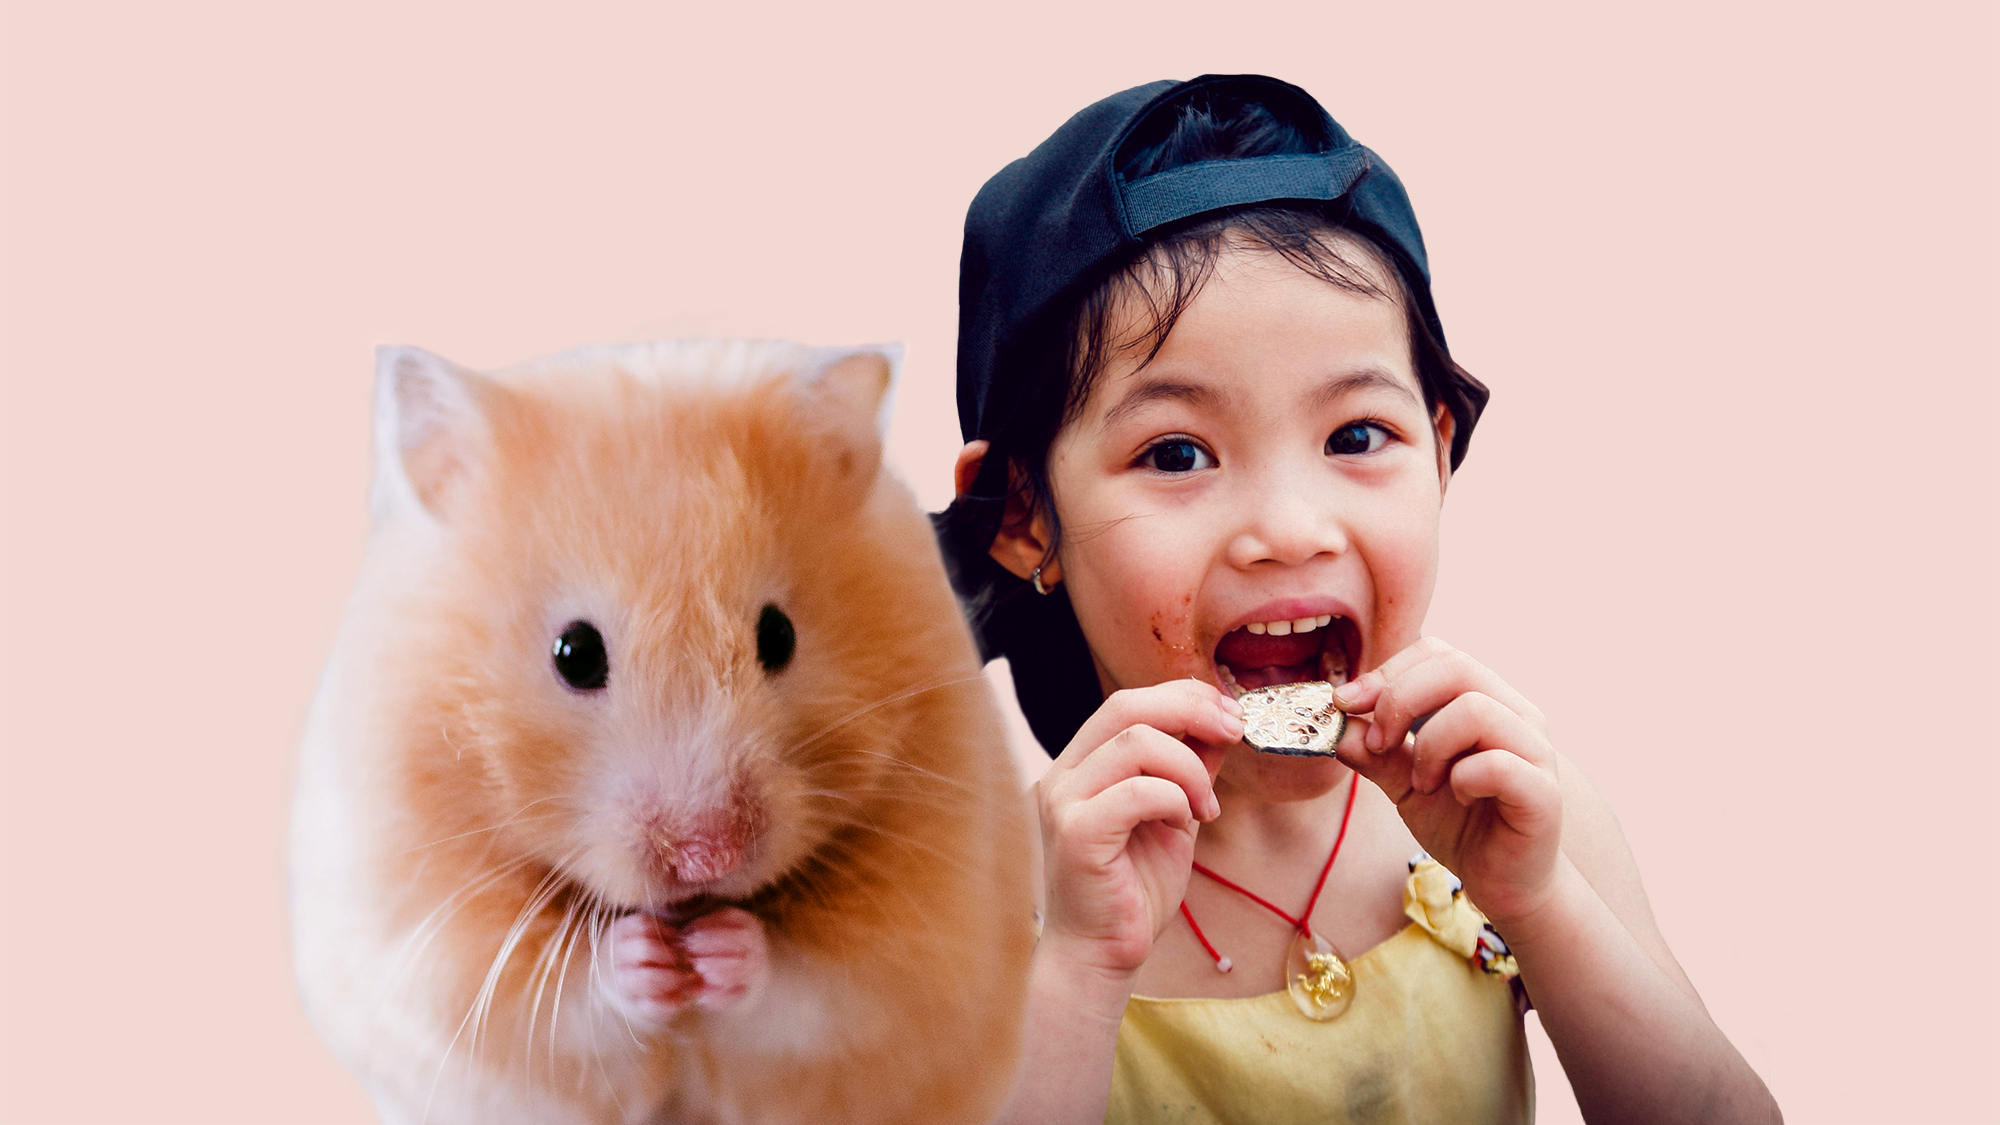 Humans and mice, different rhythm of life. Original photos by Tong Nguyen van and Ricky Kharawala on Unsplash